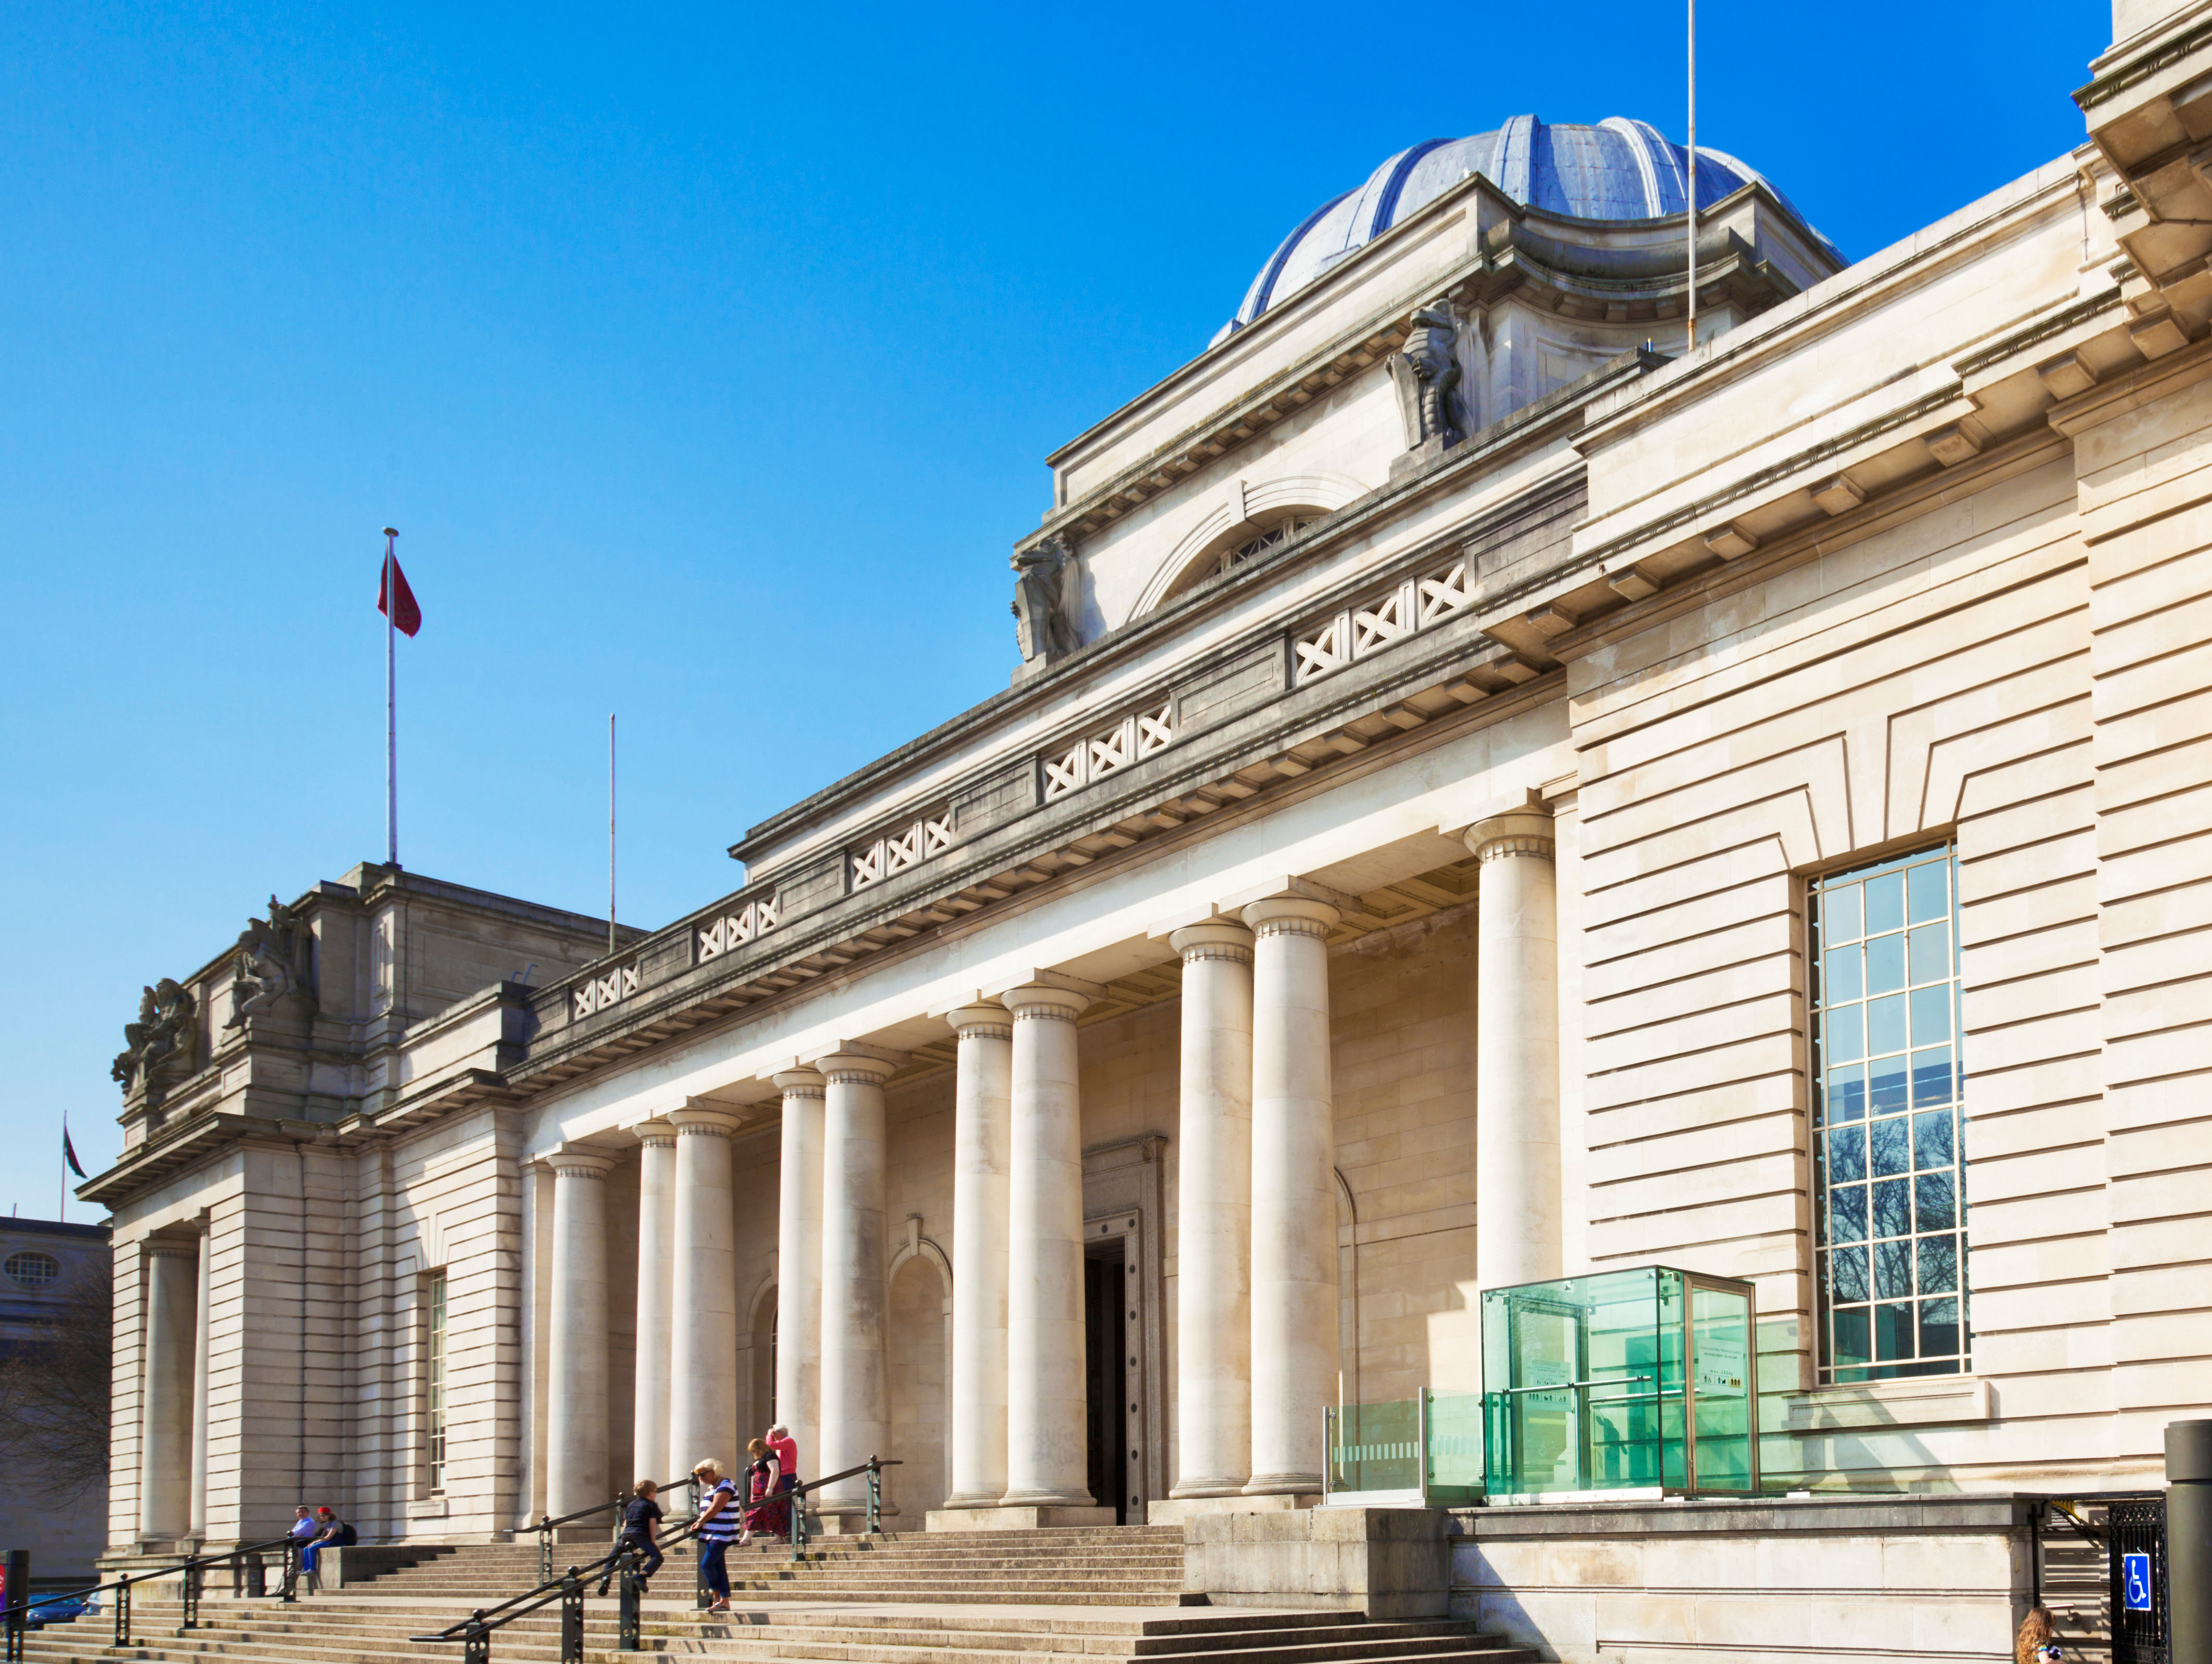 The National Museum Cardiff is at risk of closure